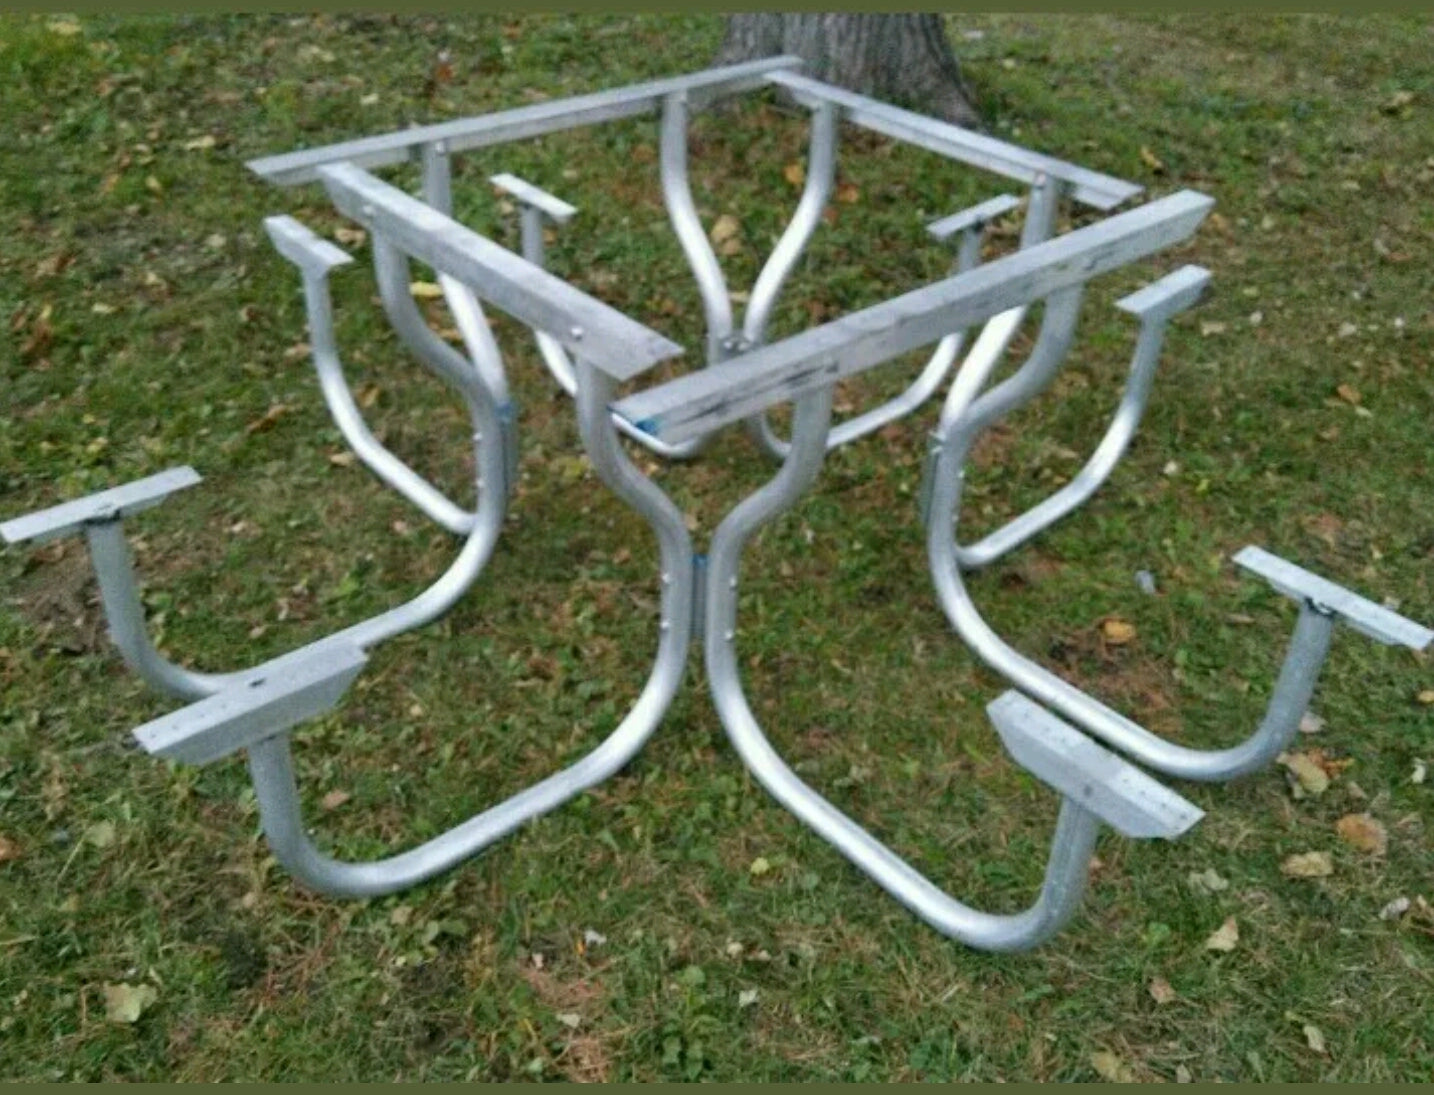 Aluminum  sq.top picnic table frame- frame only